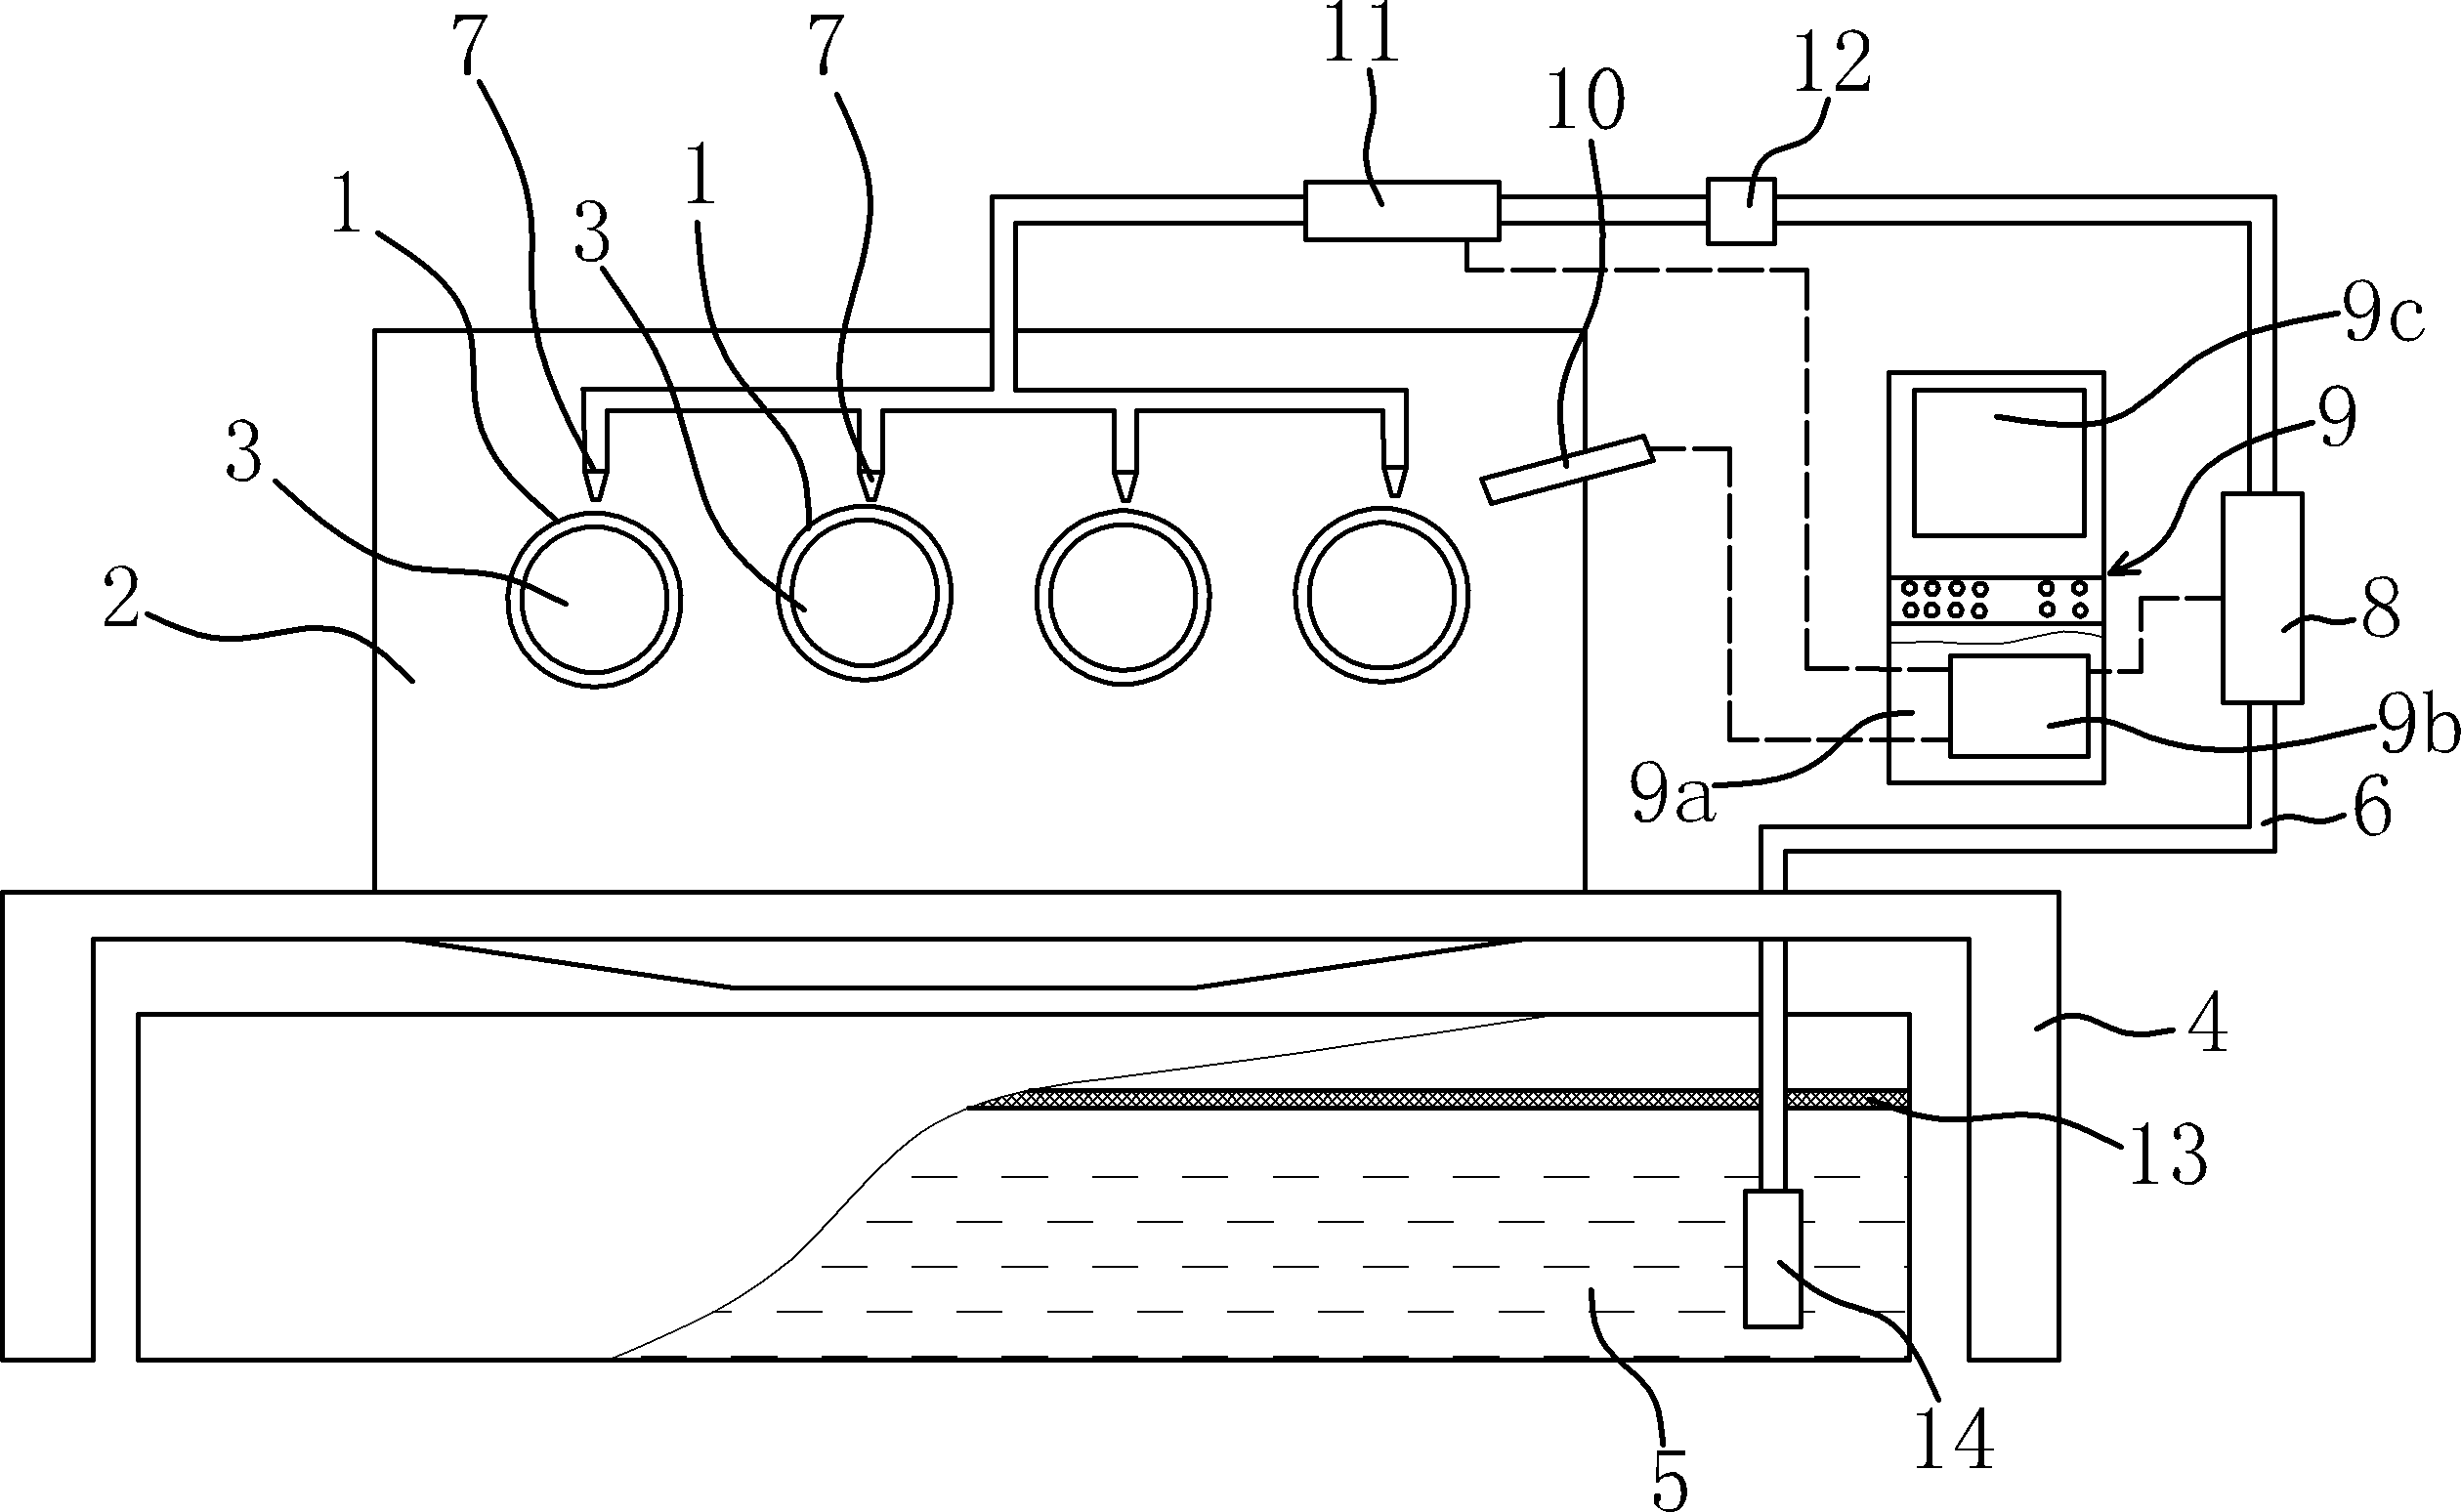 Lubrication effect observing device for engine pistons of automobile